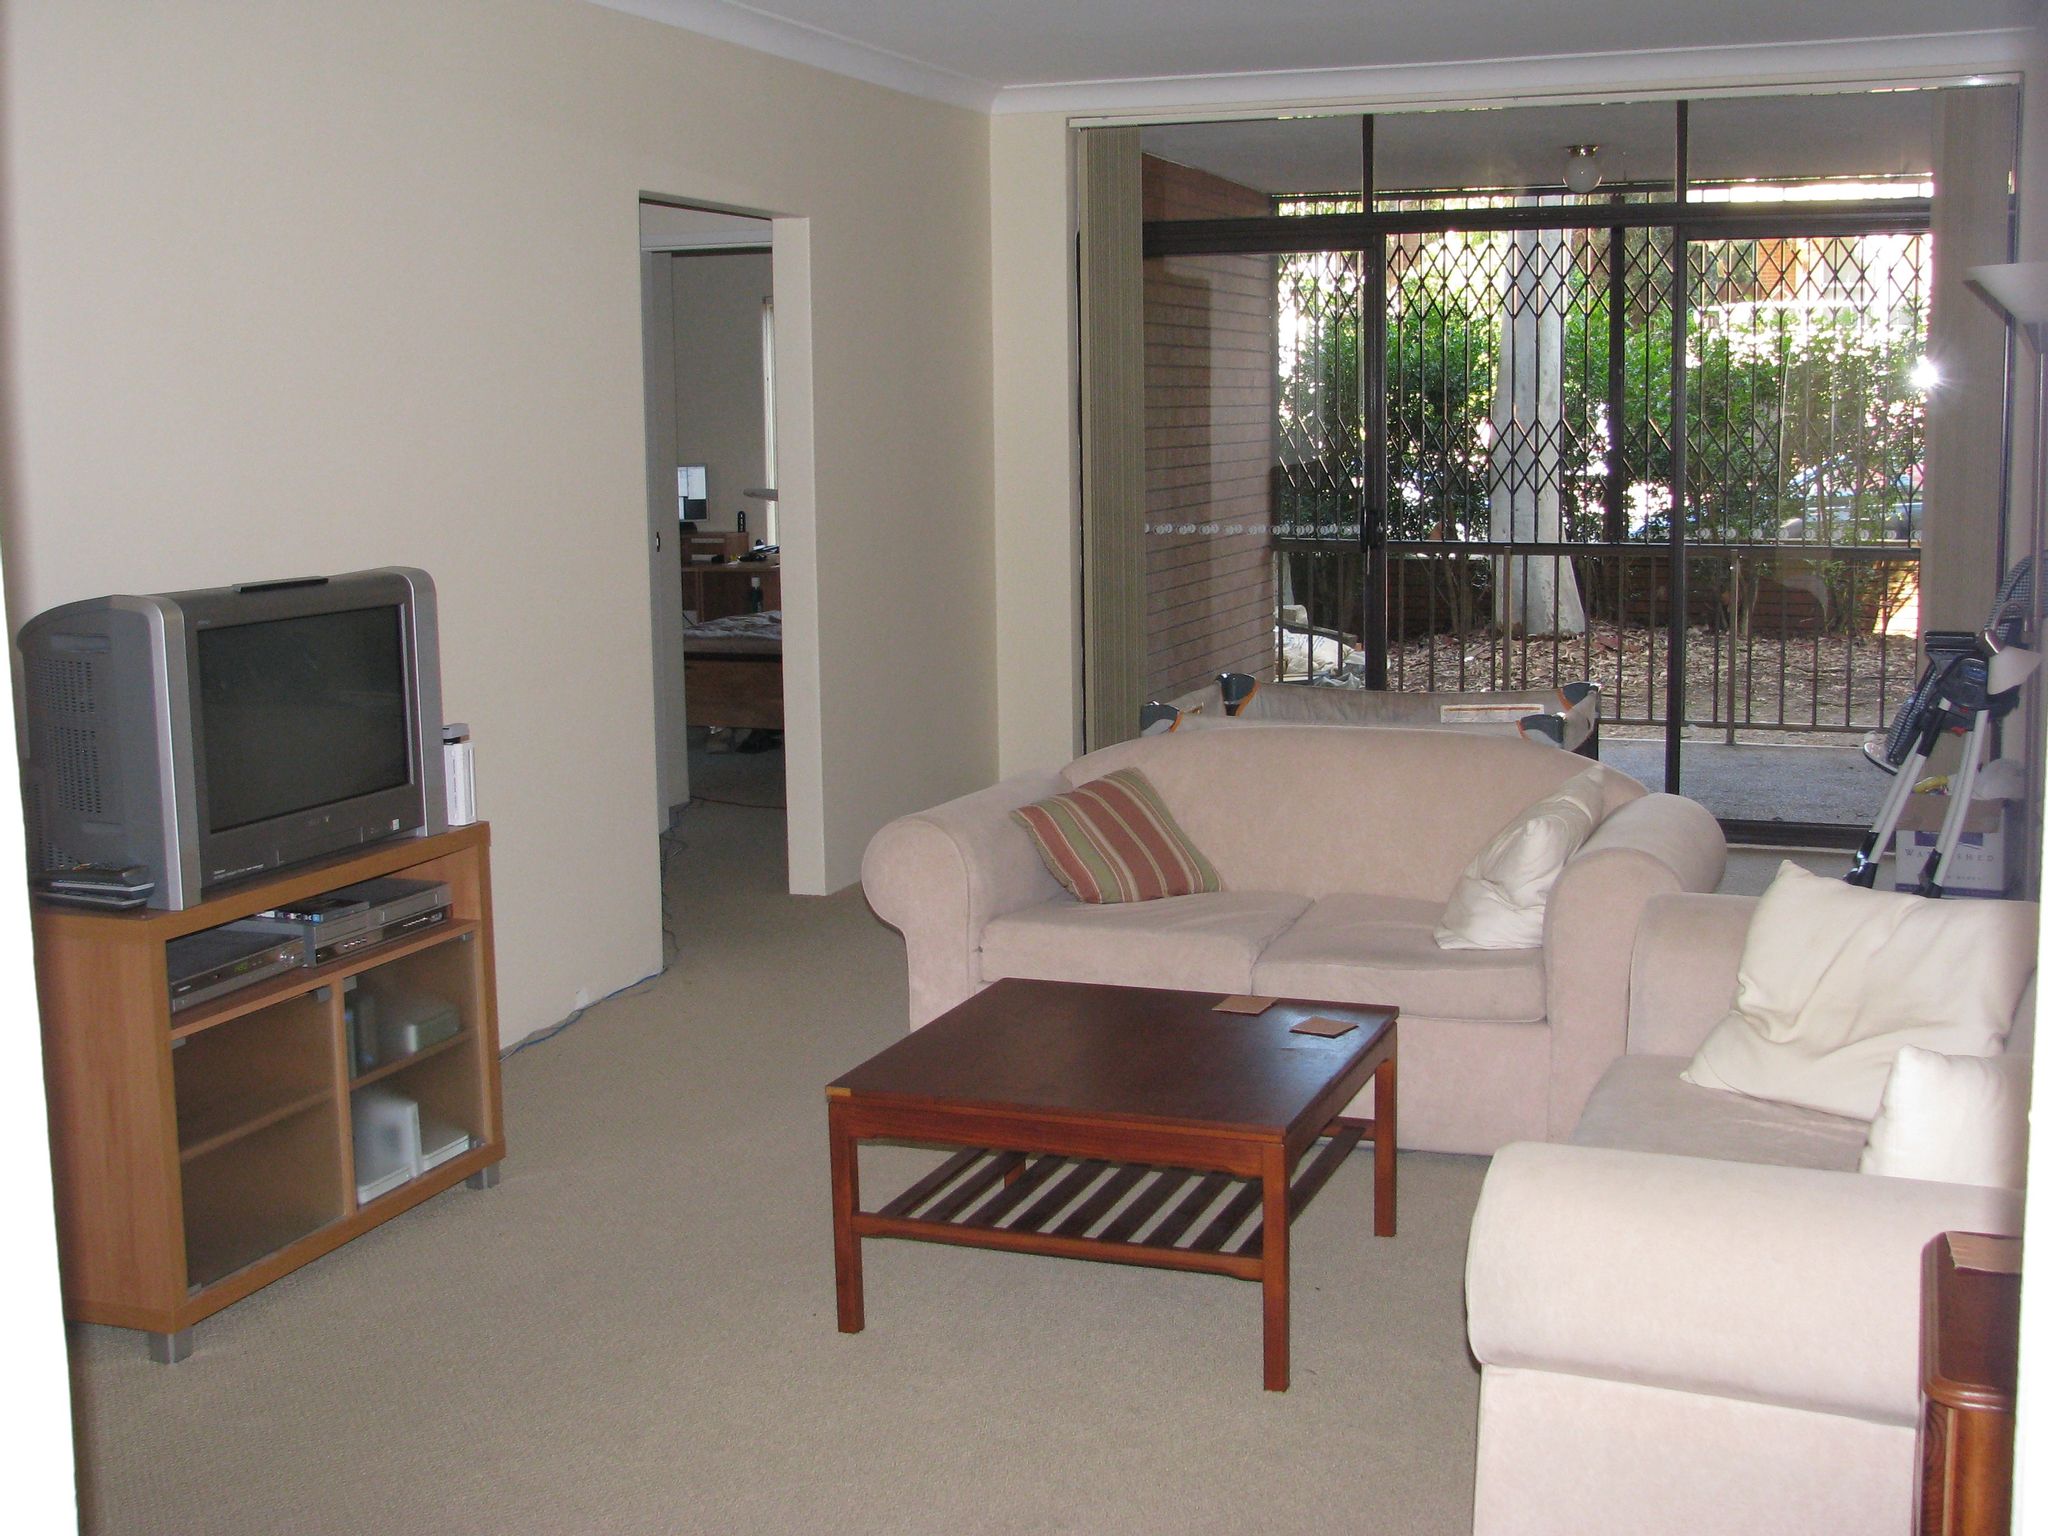 A photo of the loungeroom inside a ground-floor unit. There's a small balcony facing where the camera is pointing, with horrible security bars over the gap between the railing and the ceiling. Inside on the left wall is a CRT TV on top of a wooden TV stand with stuff inside it. Facing away from the balcony is a two-seater lounge, and to the right of that facing the TV is another two-seater lounge of the same sort. There's a low square brown wooden coffee in between the lounges.